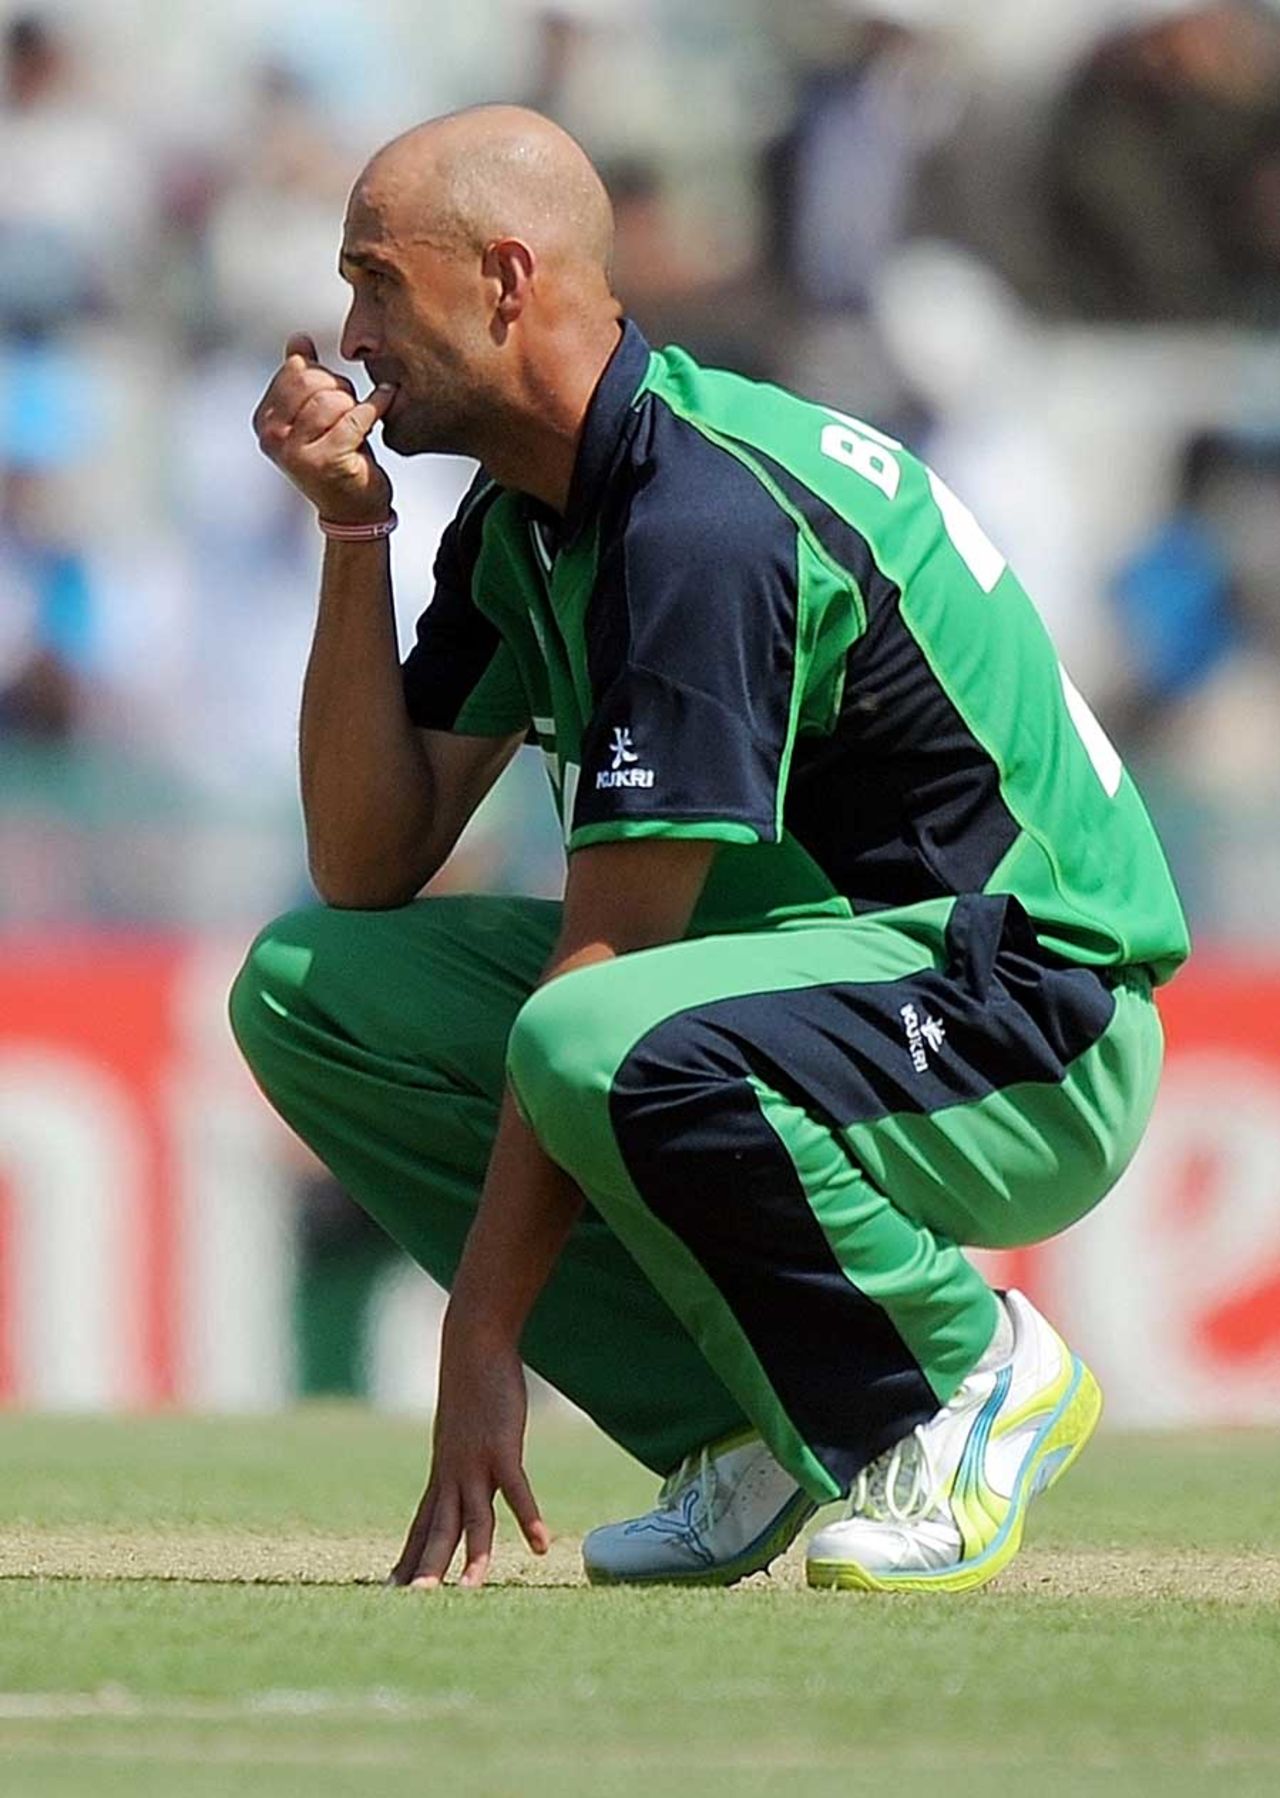 Andre Botha reacts as Kieron Pollard goes out of control, Ireland v West Indies, Group B, World Cup, Mohali, March 11, 2011